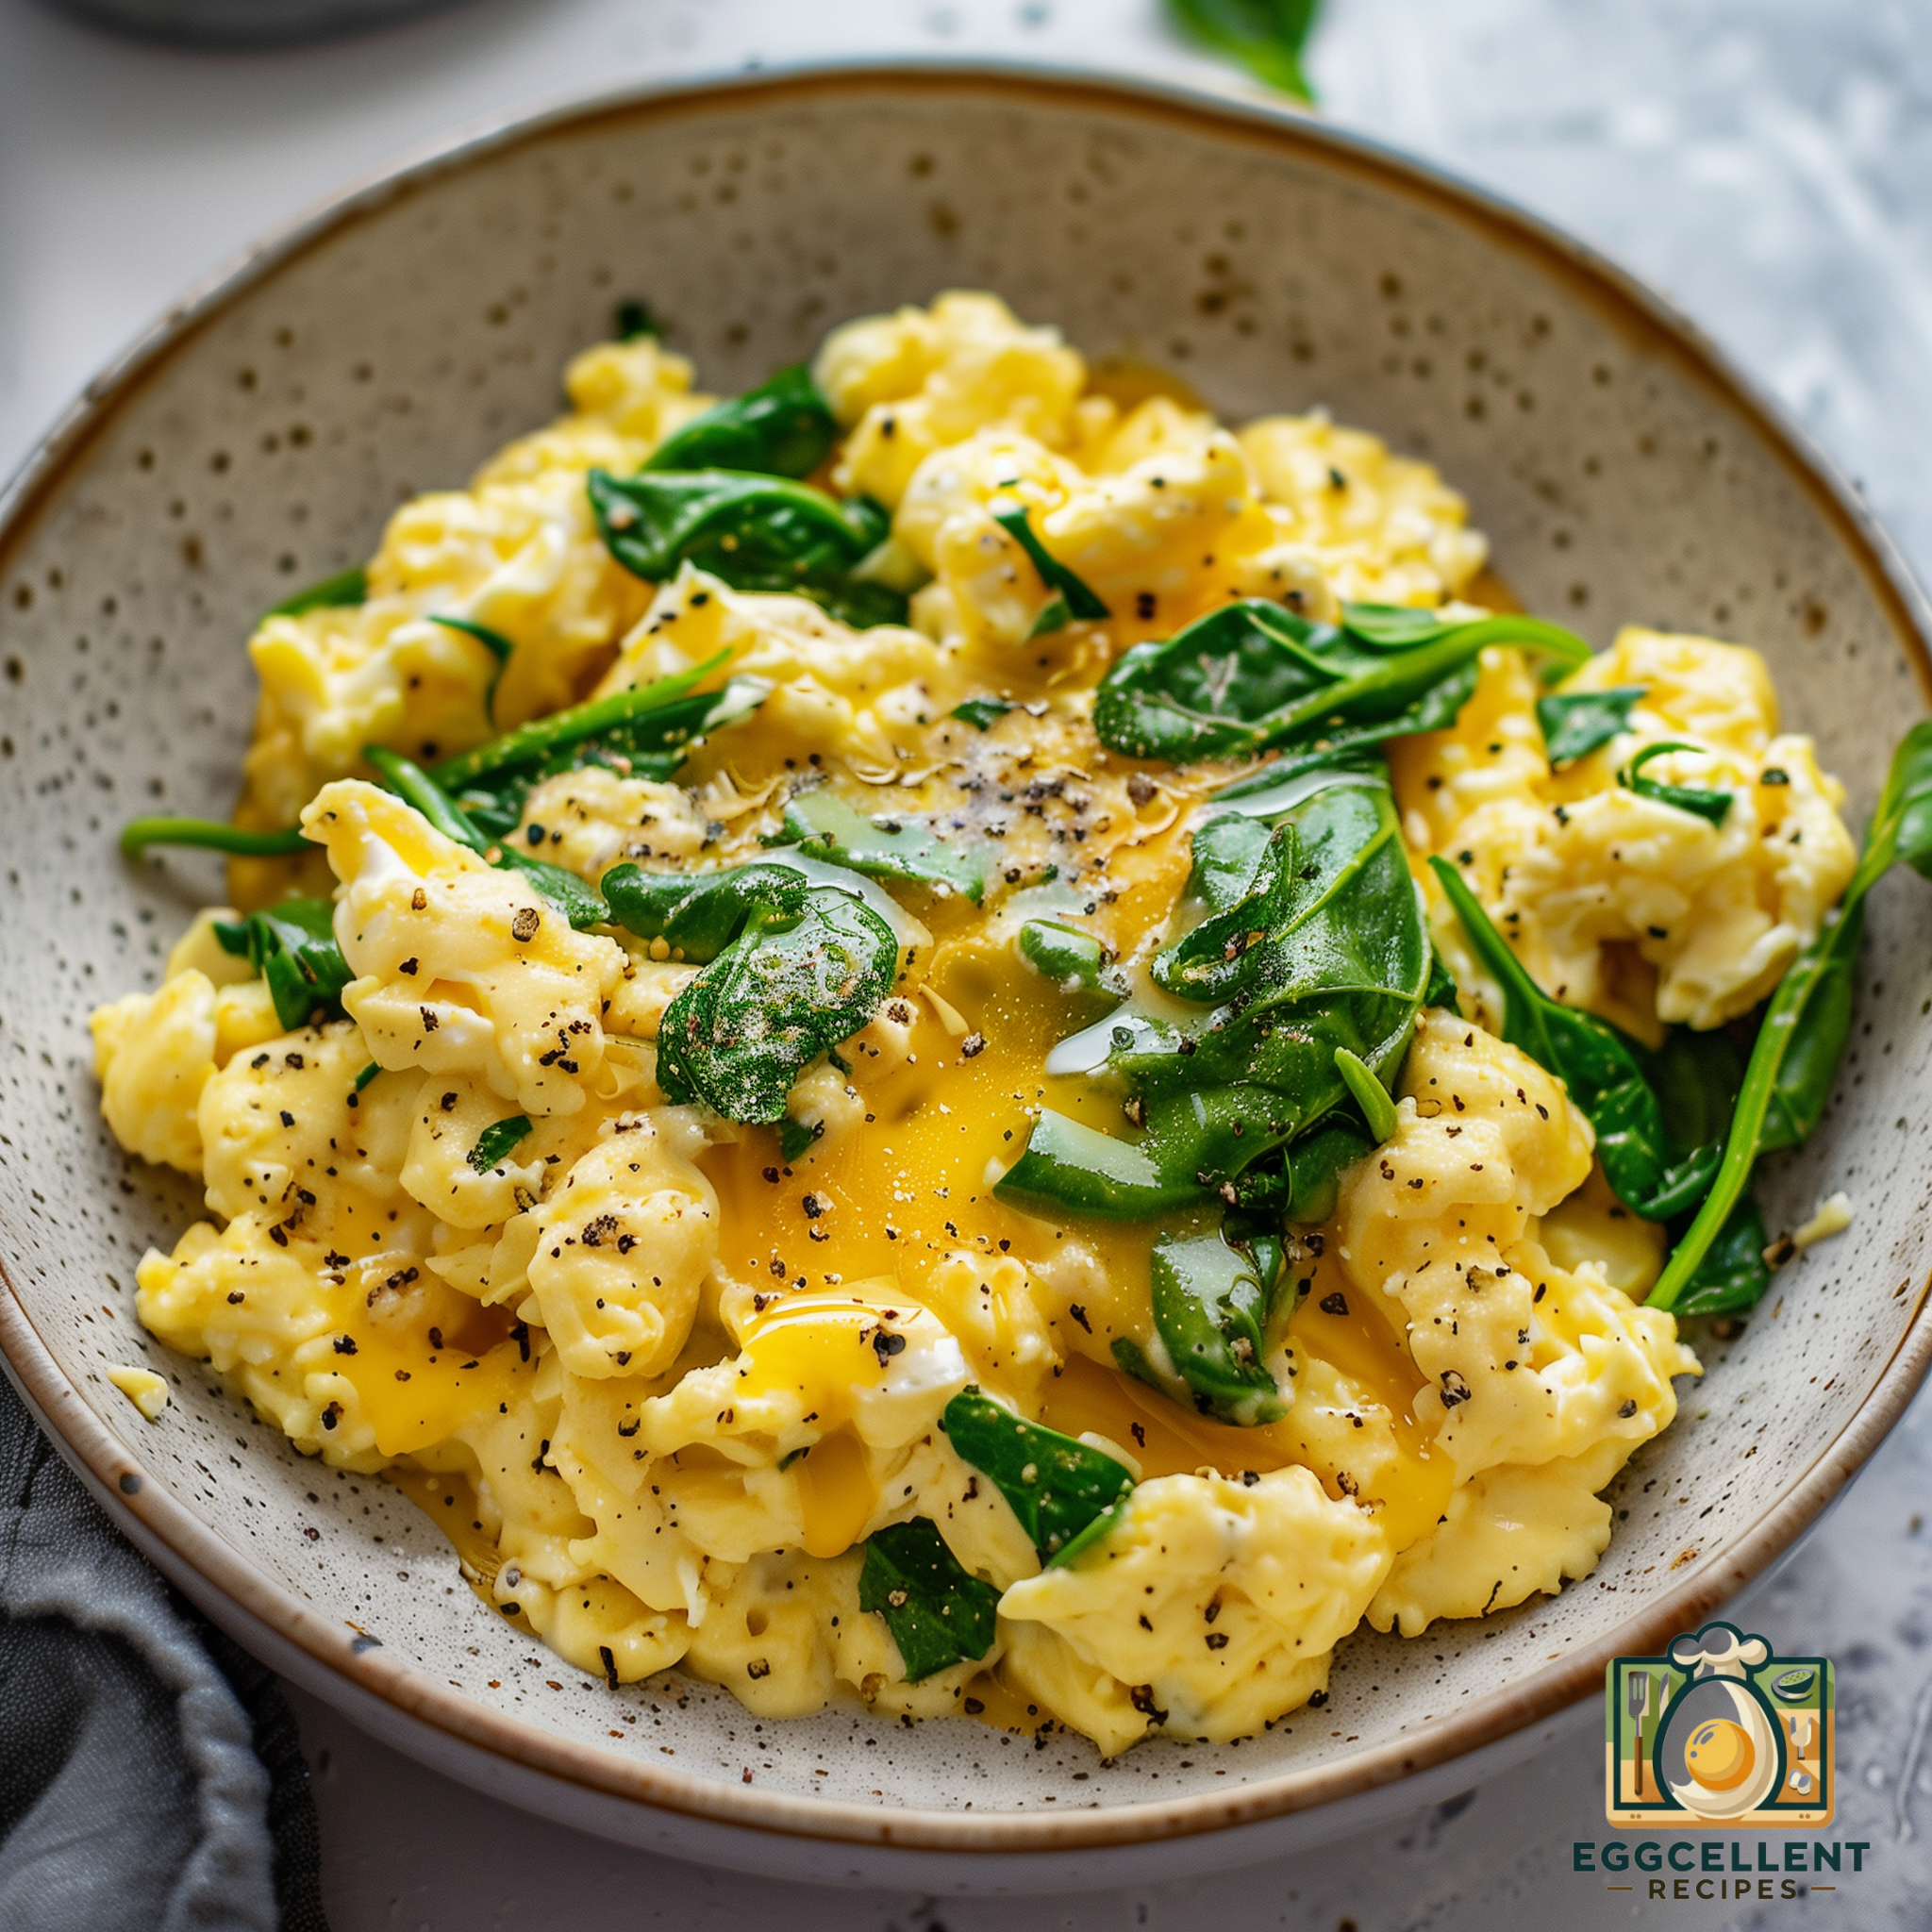 Scrambled Eggs with Cheese and Sautéed Spinach Recipe